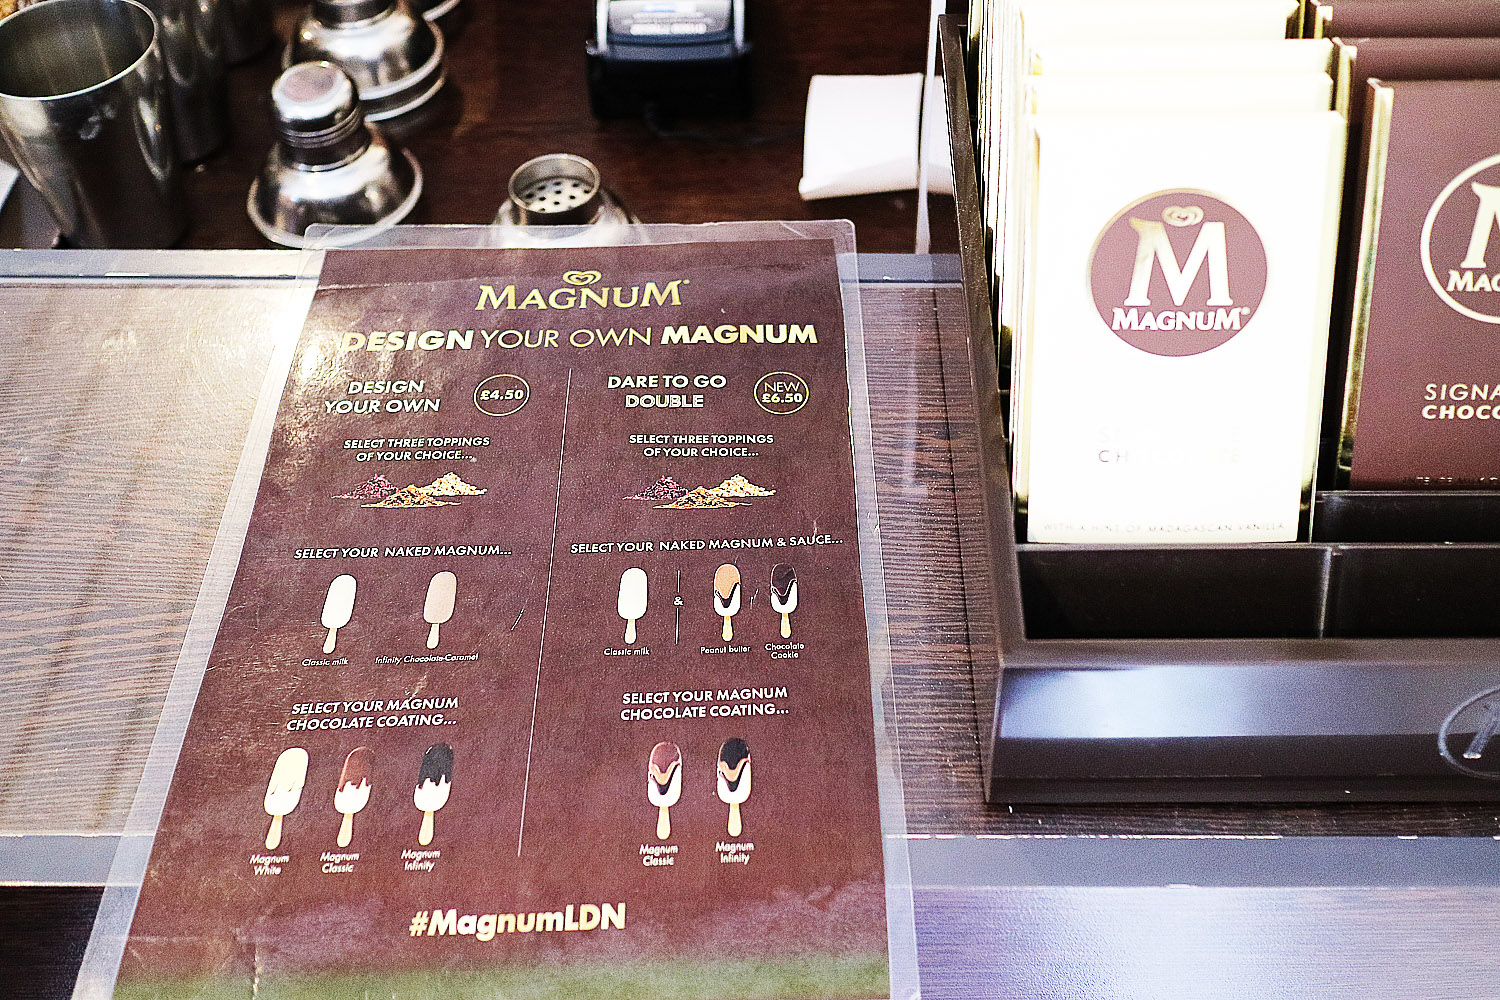 Magnum-Store-London-10 My experience at the Magnum Pleasure Store London